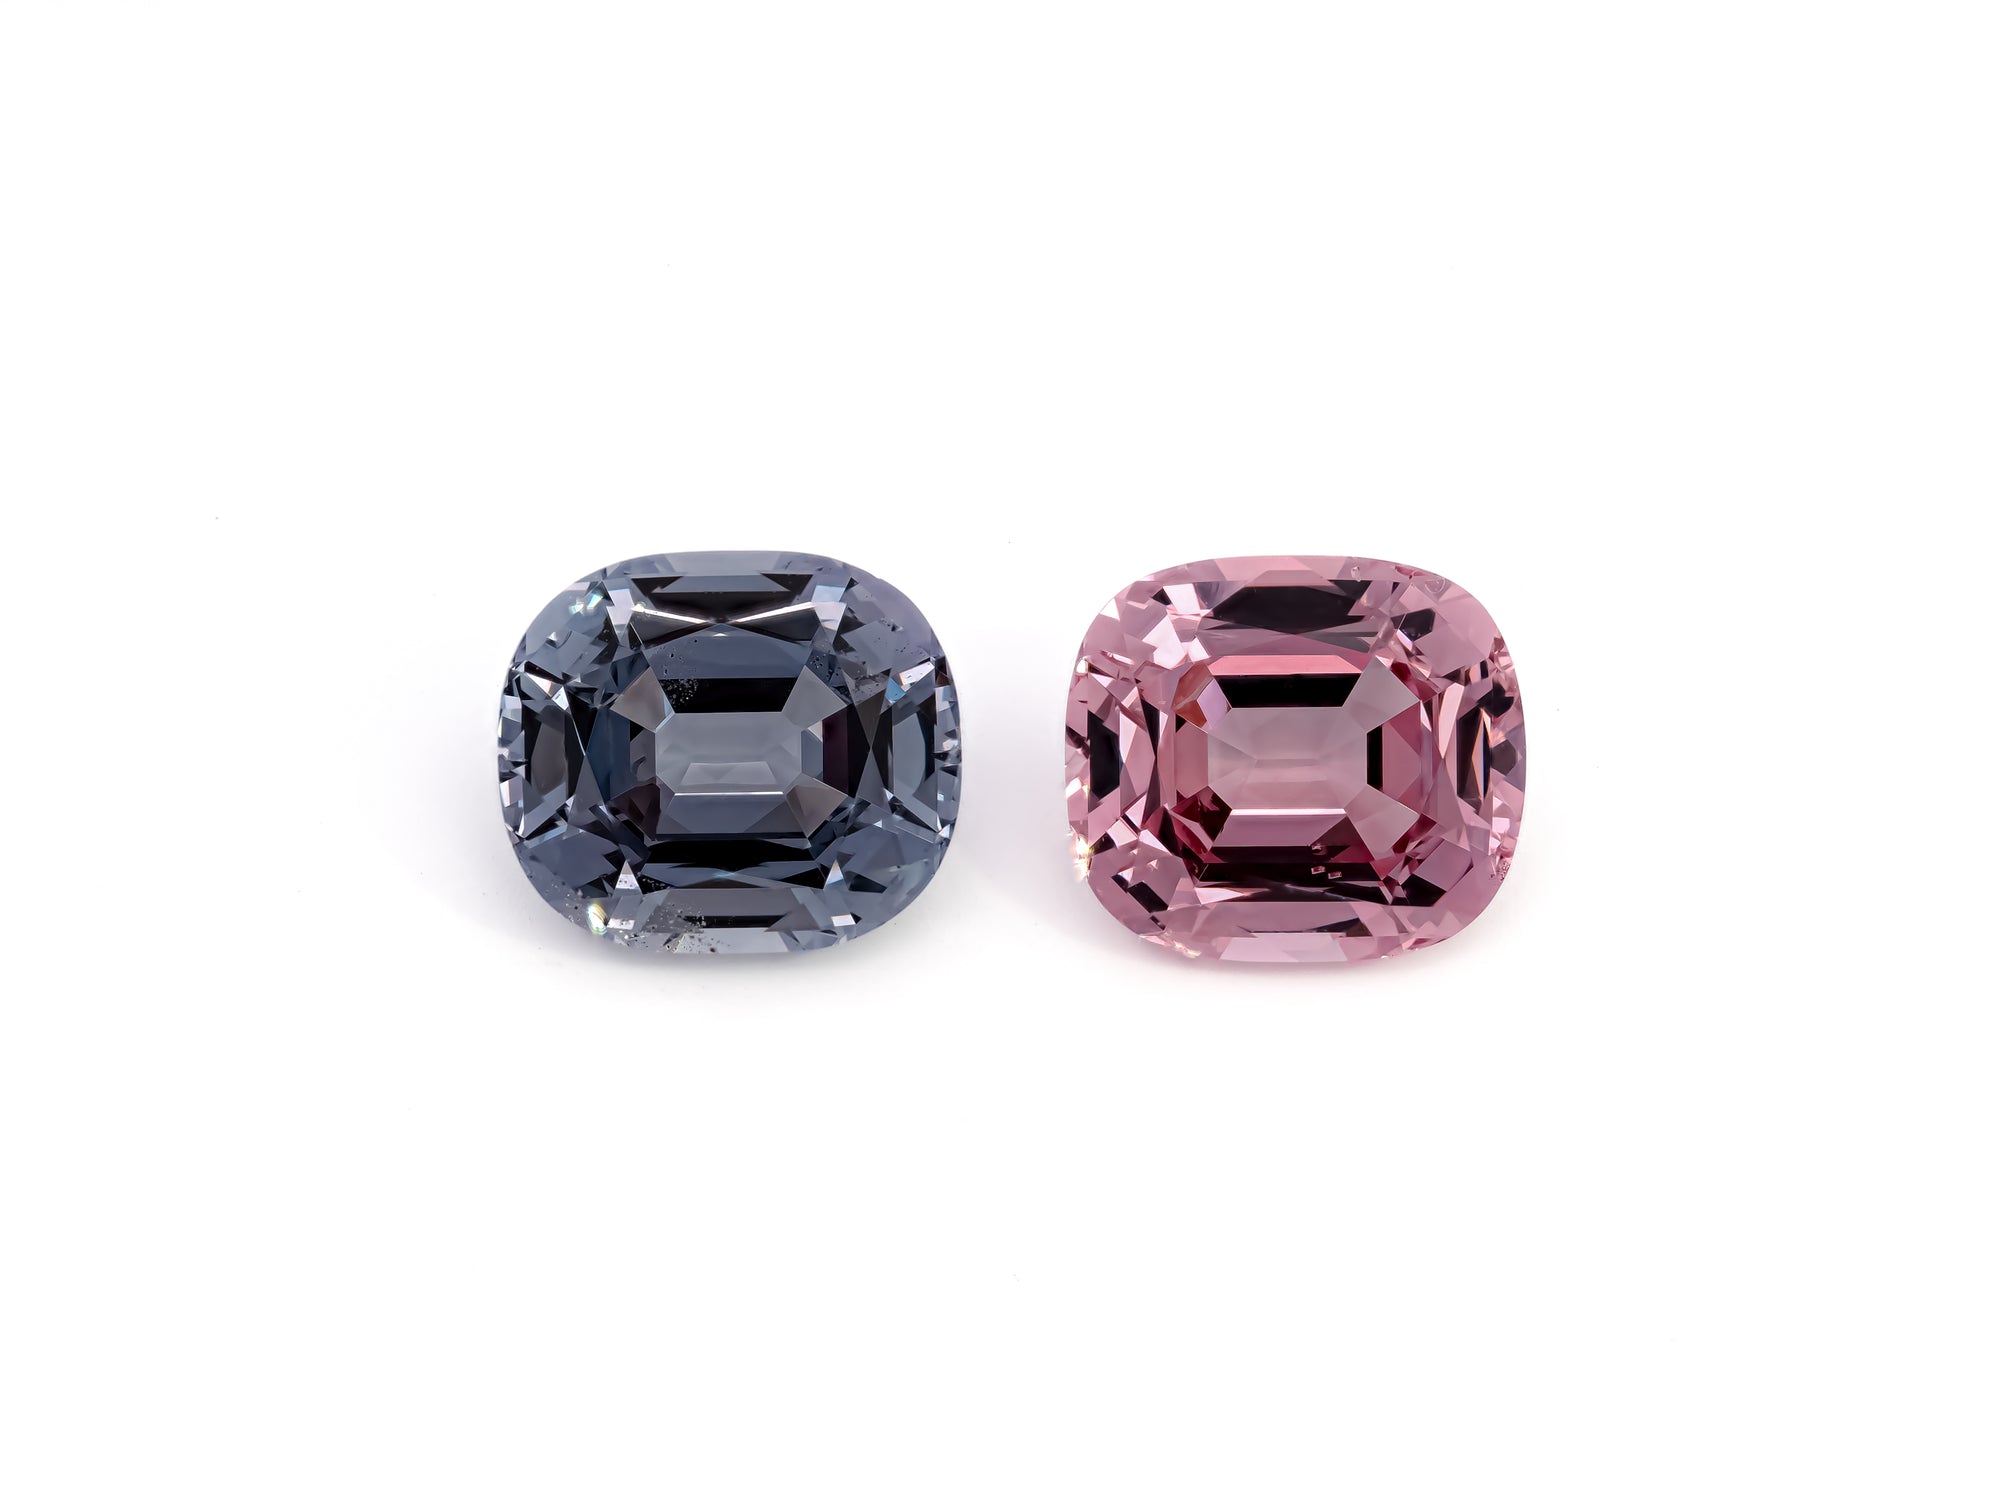 Silver grey & pink spinel 8.92/2